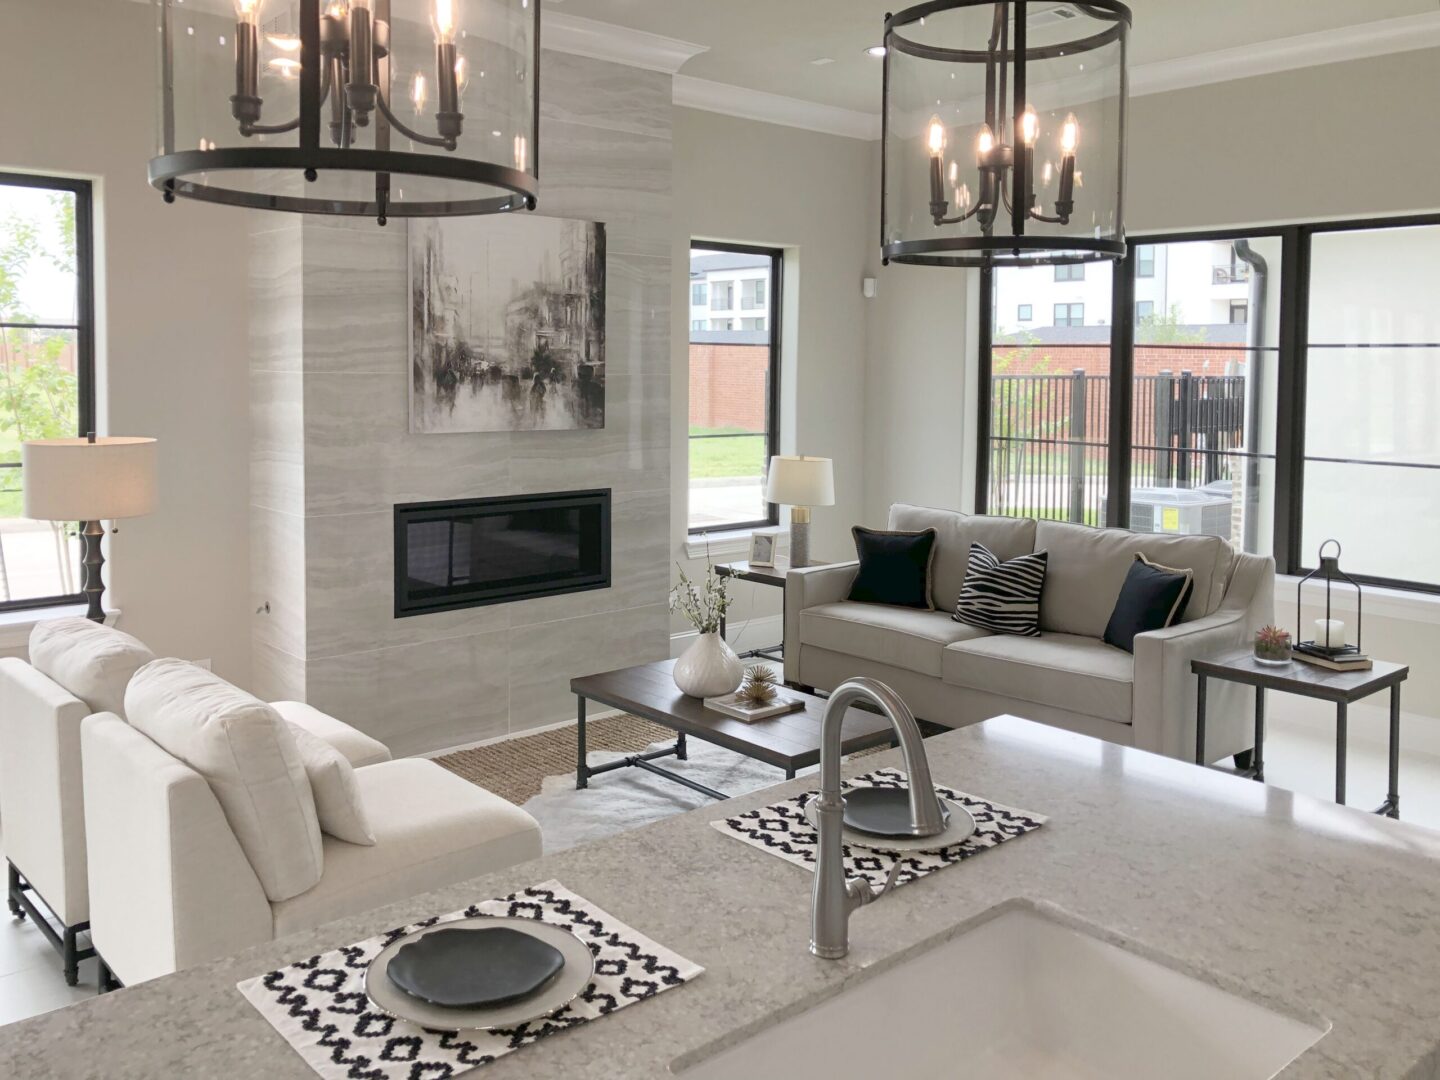 A modern living room with white furniture and a fireplace.